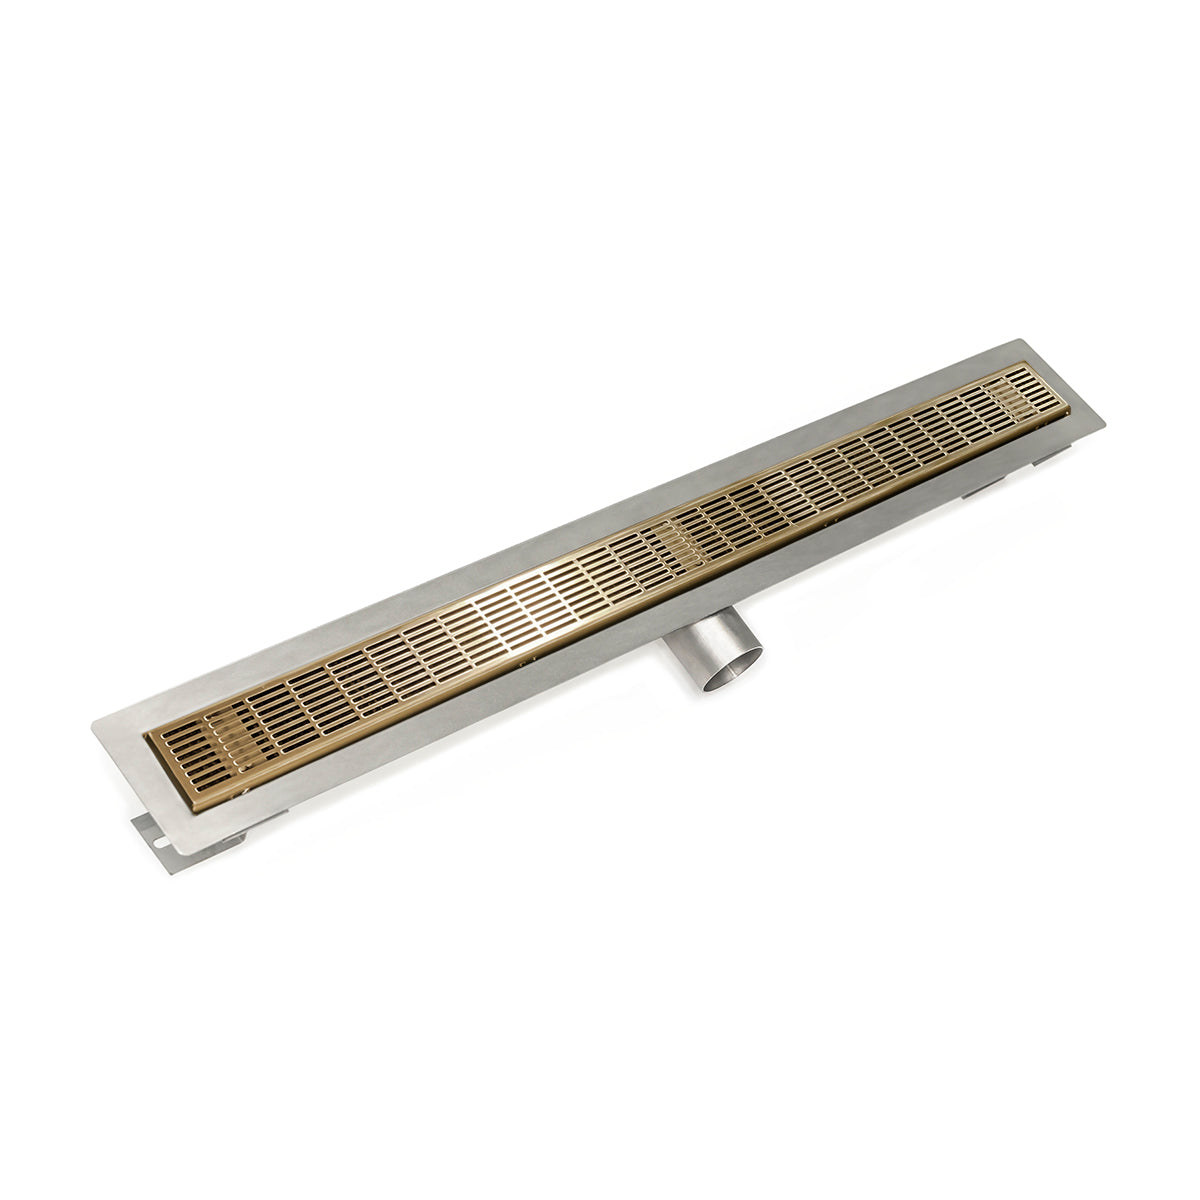 Infinity Drain 32" FT Series Side Outlet Linear Drain Kit with 2 1/2" Perforated Slotted Grate